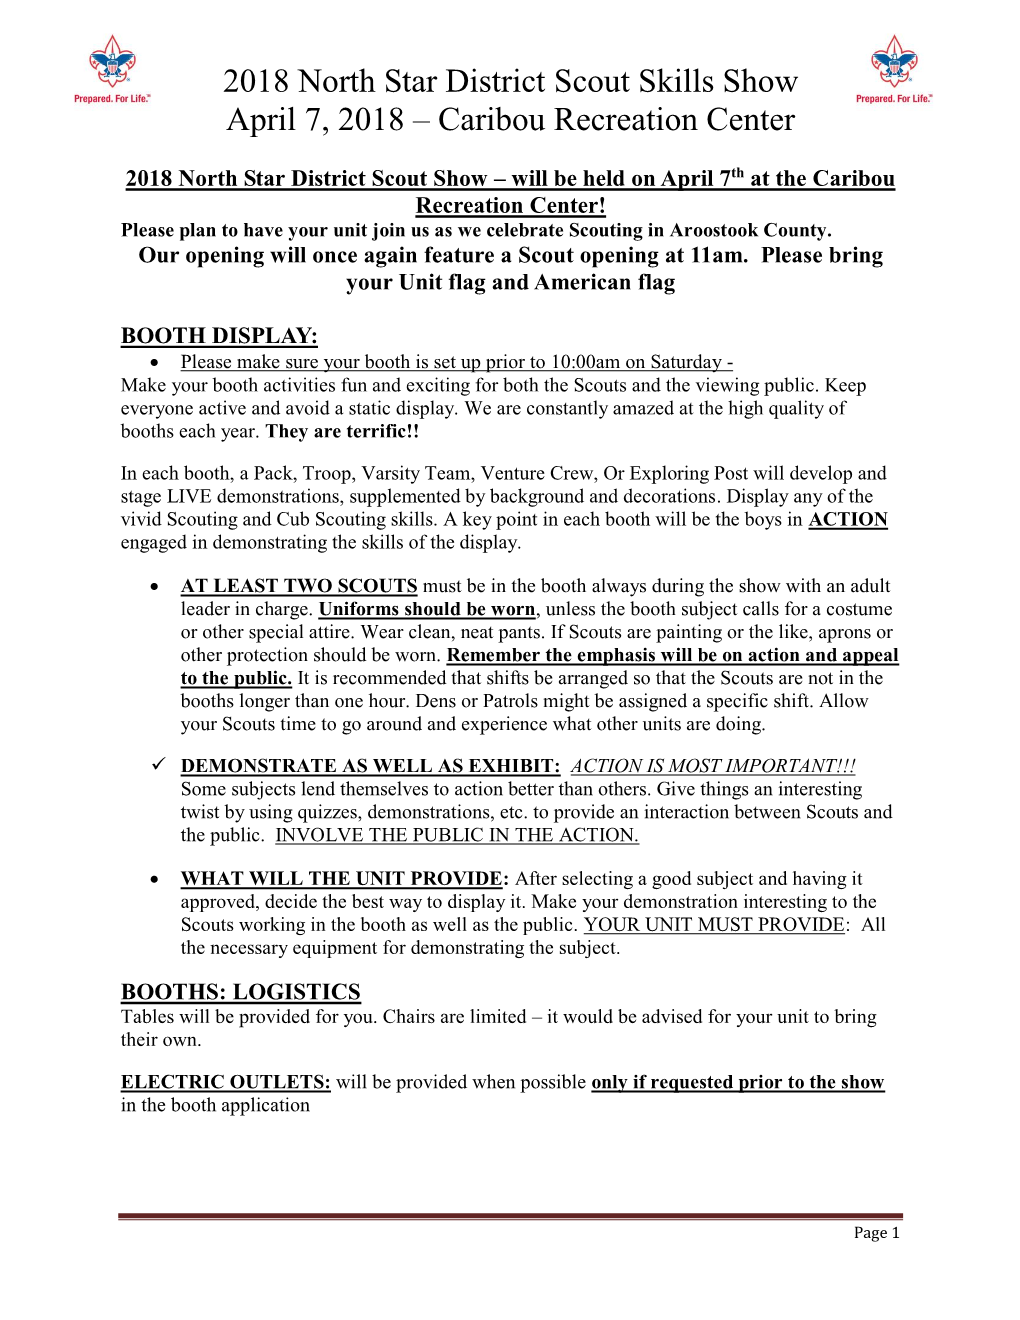 2018 North Star District Scout Skills Show April 7, 2018 – Caribou Recreation Center